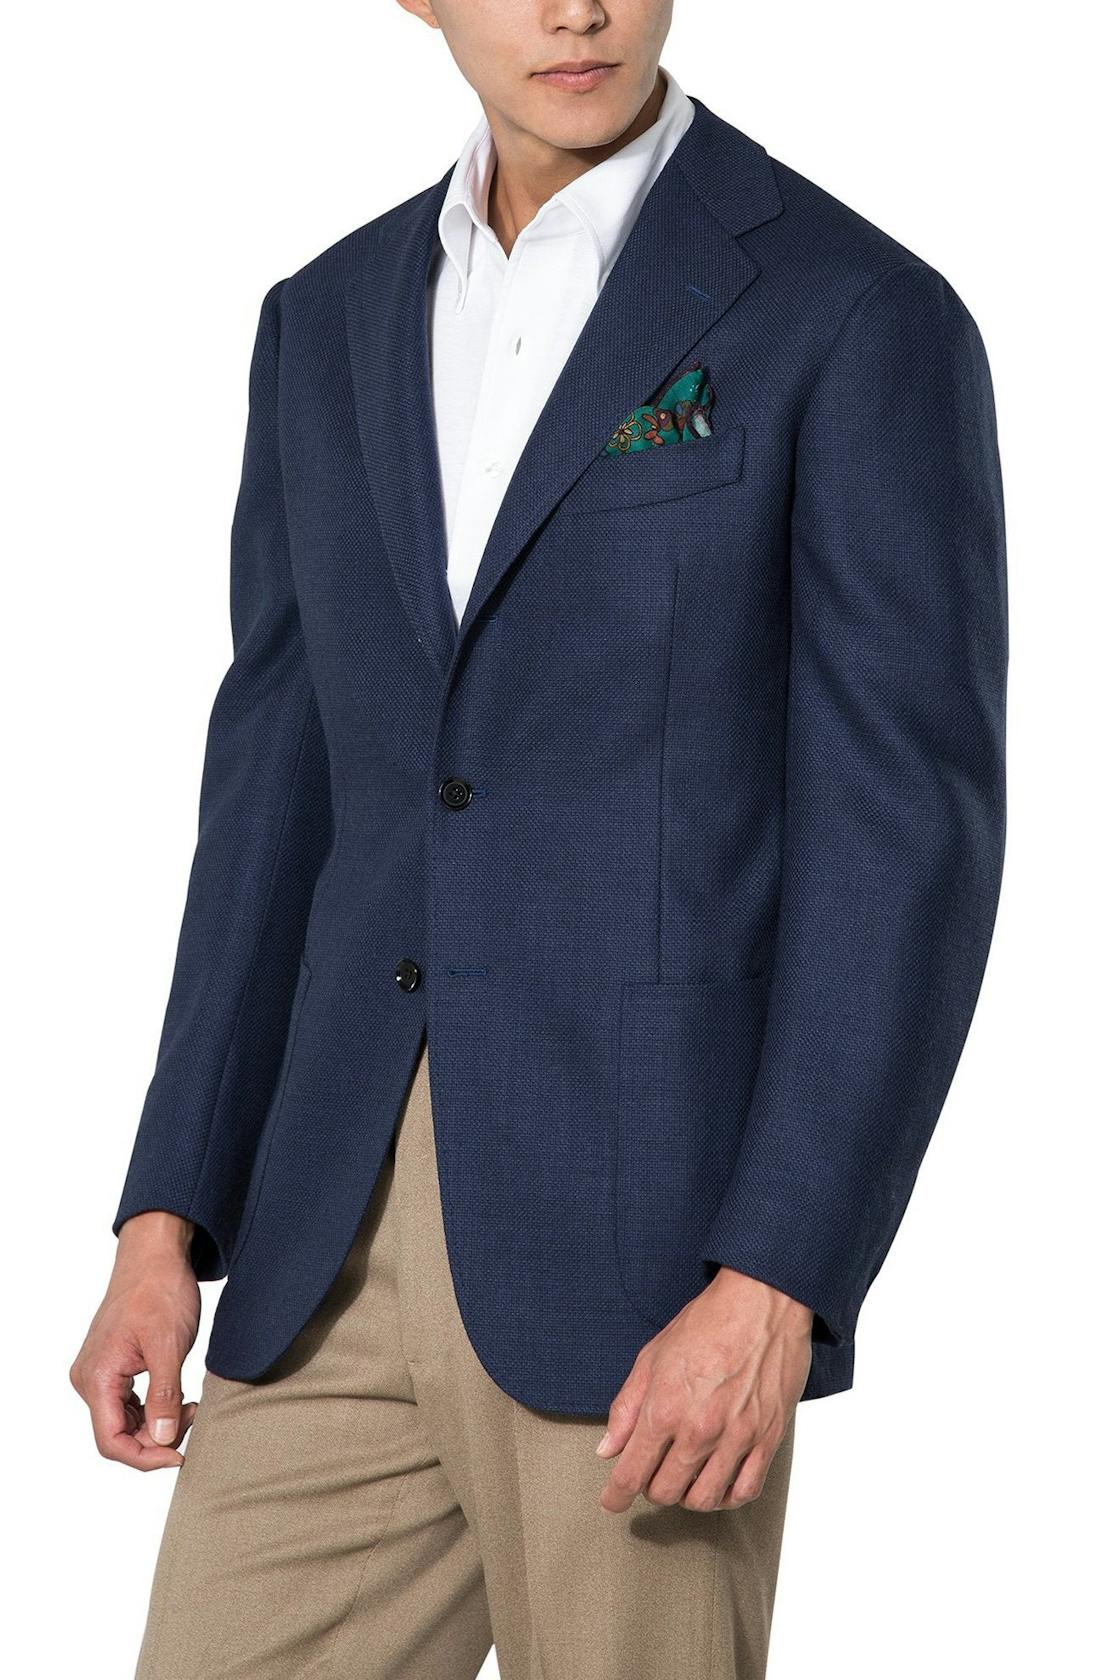 The Armoury by Ring Jacket Model 3 Blue Wool Balloon Sport Coat